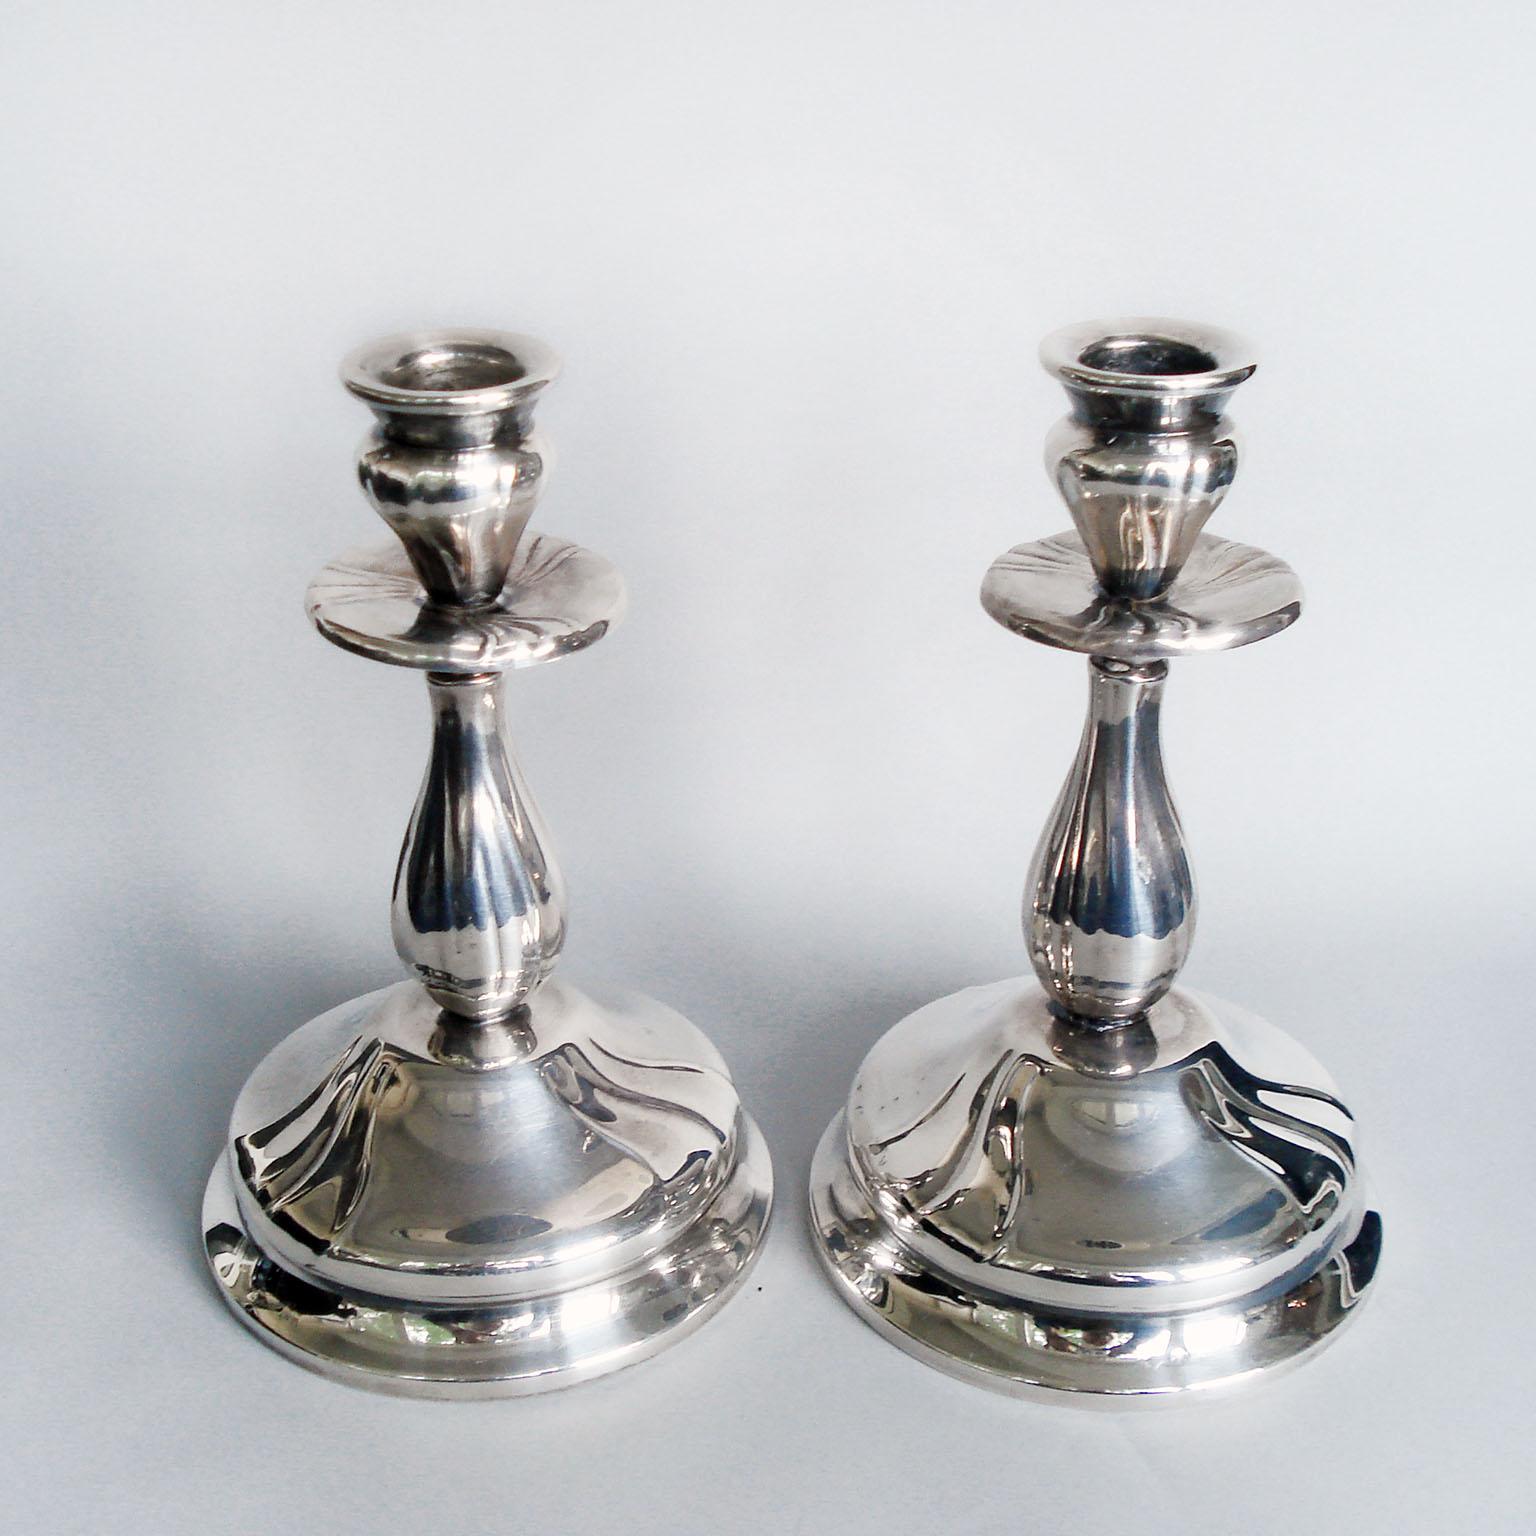 20th Century Art Nouveau Pair of Silvered Candleholders